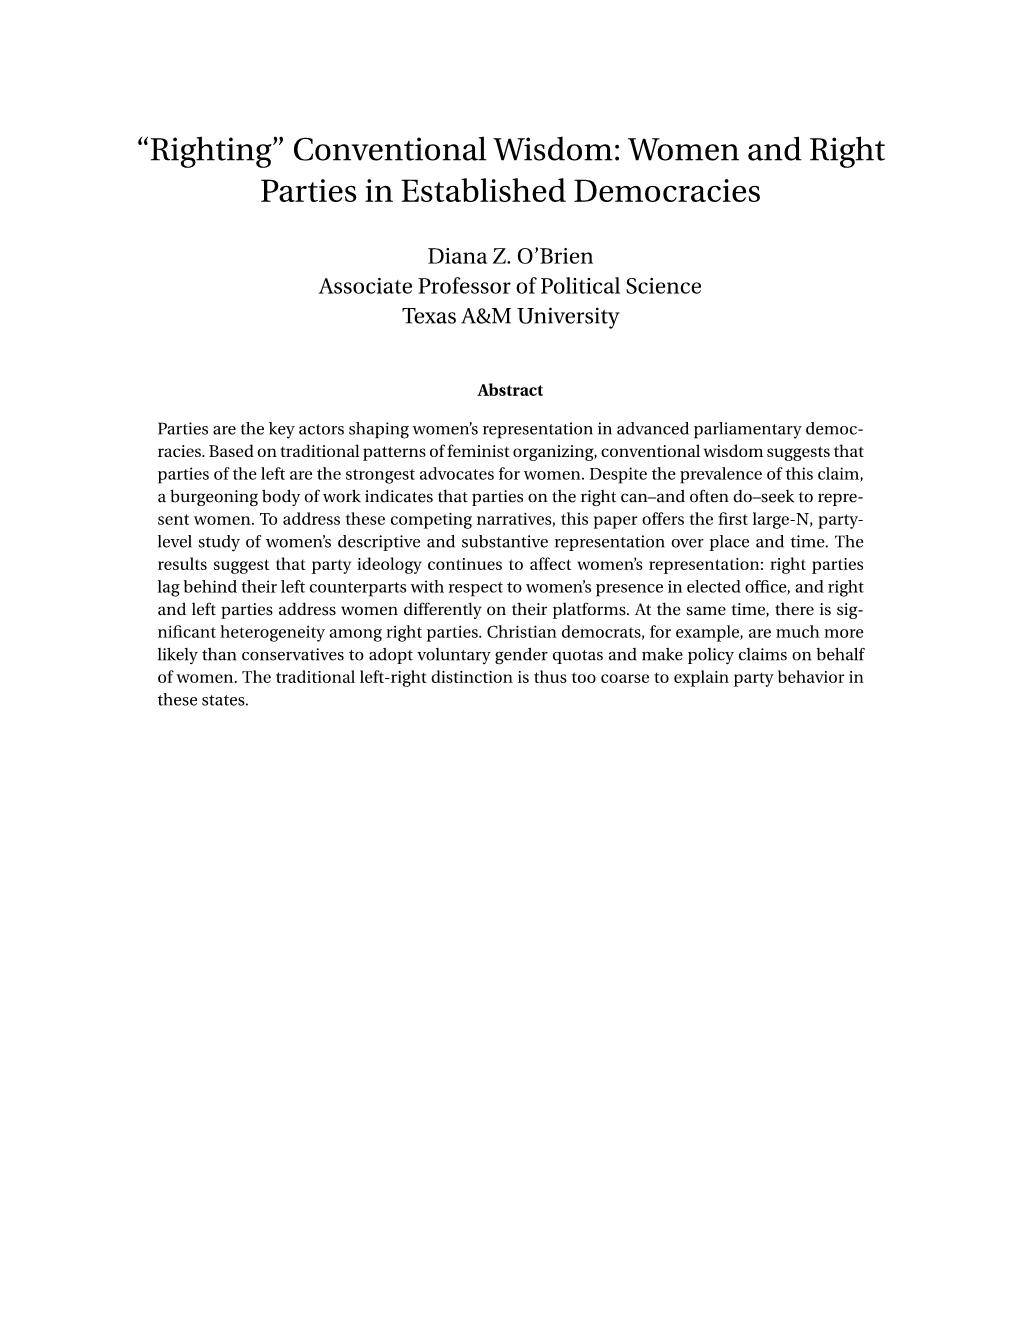 Women and Right Parties in Established Democracies